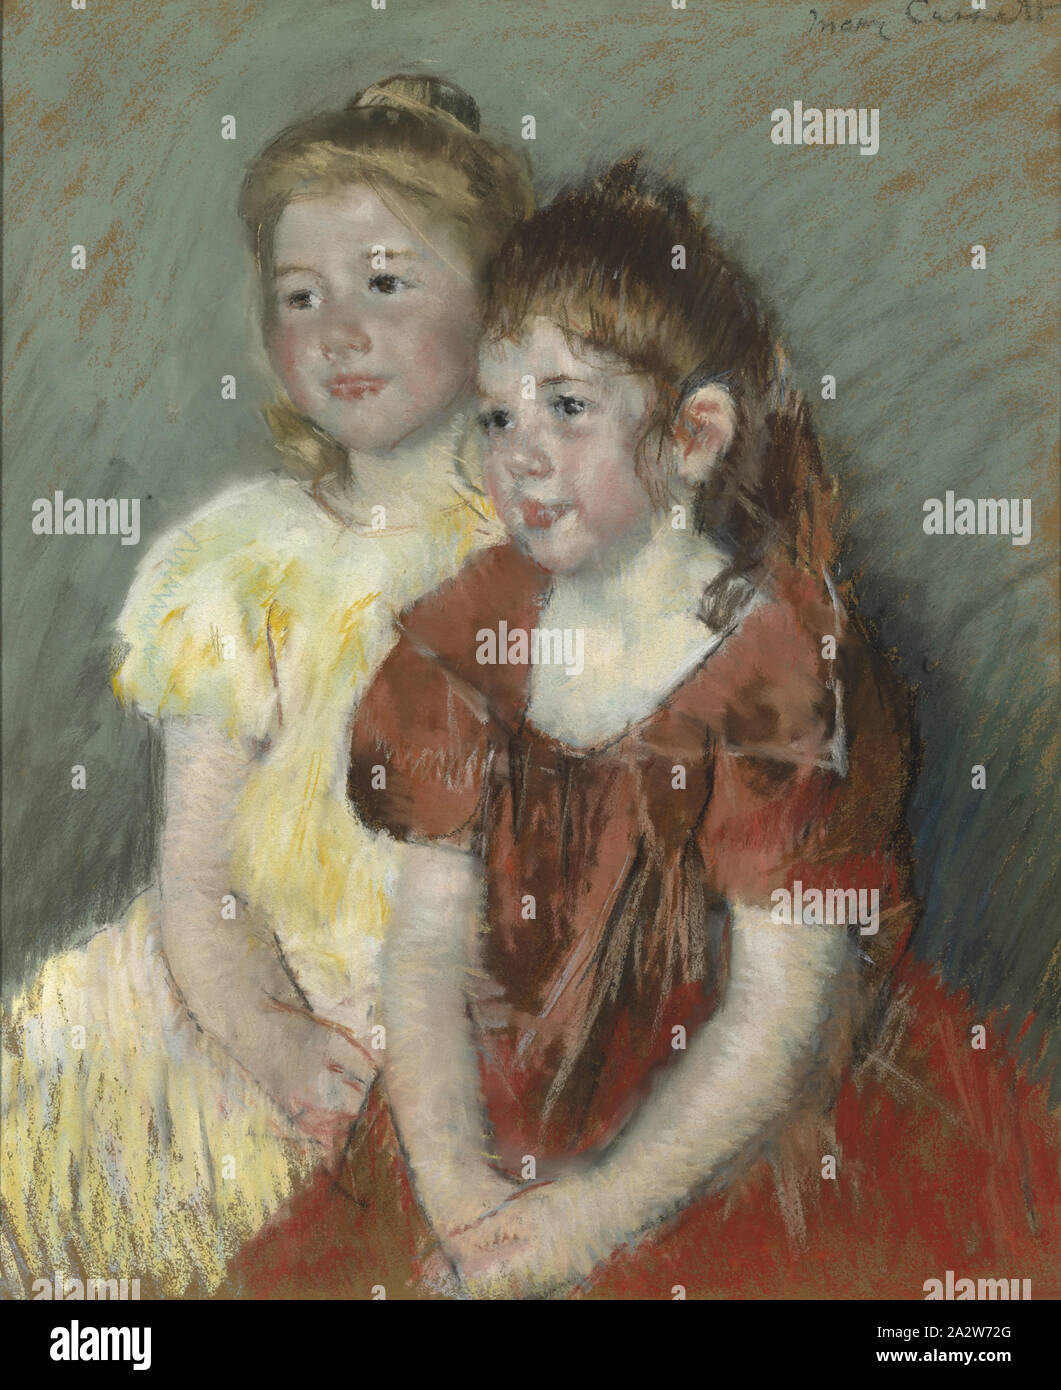 Young Girls, Mary Cassatt (American, 1844-1926), about 1900, pastel on paper, 25 x 20-3/4 in. 31-1/4 x 27 in. (framed Stock Photo